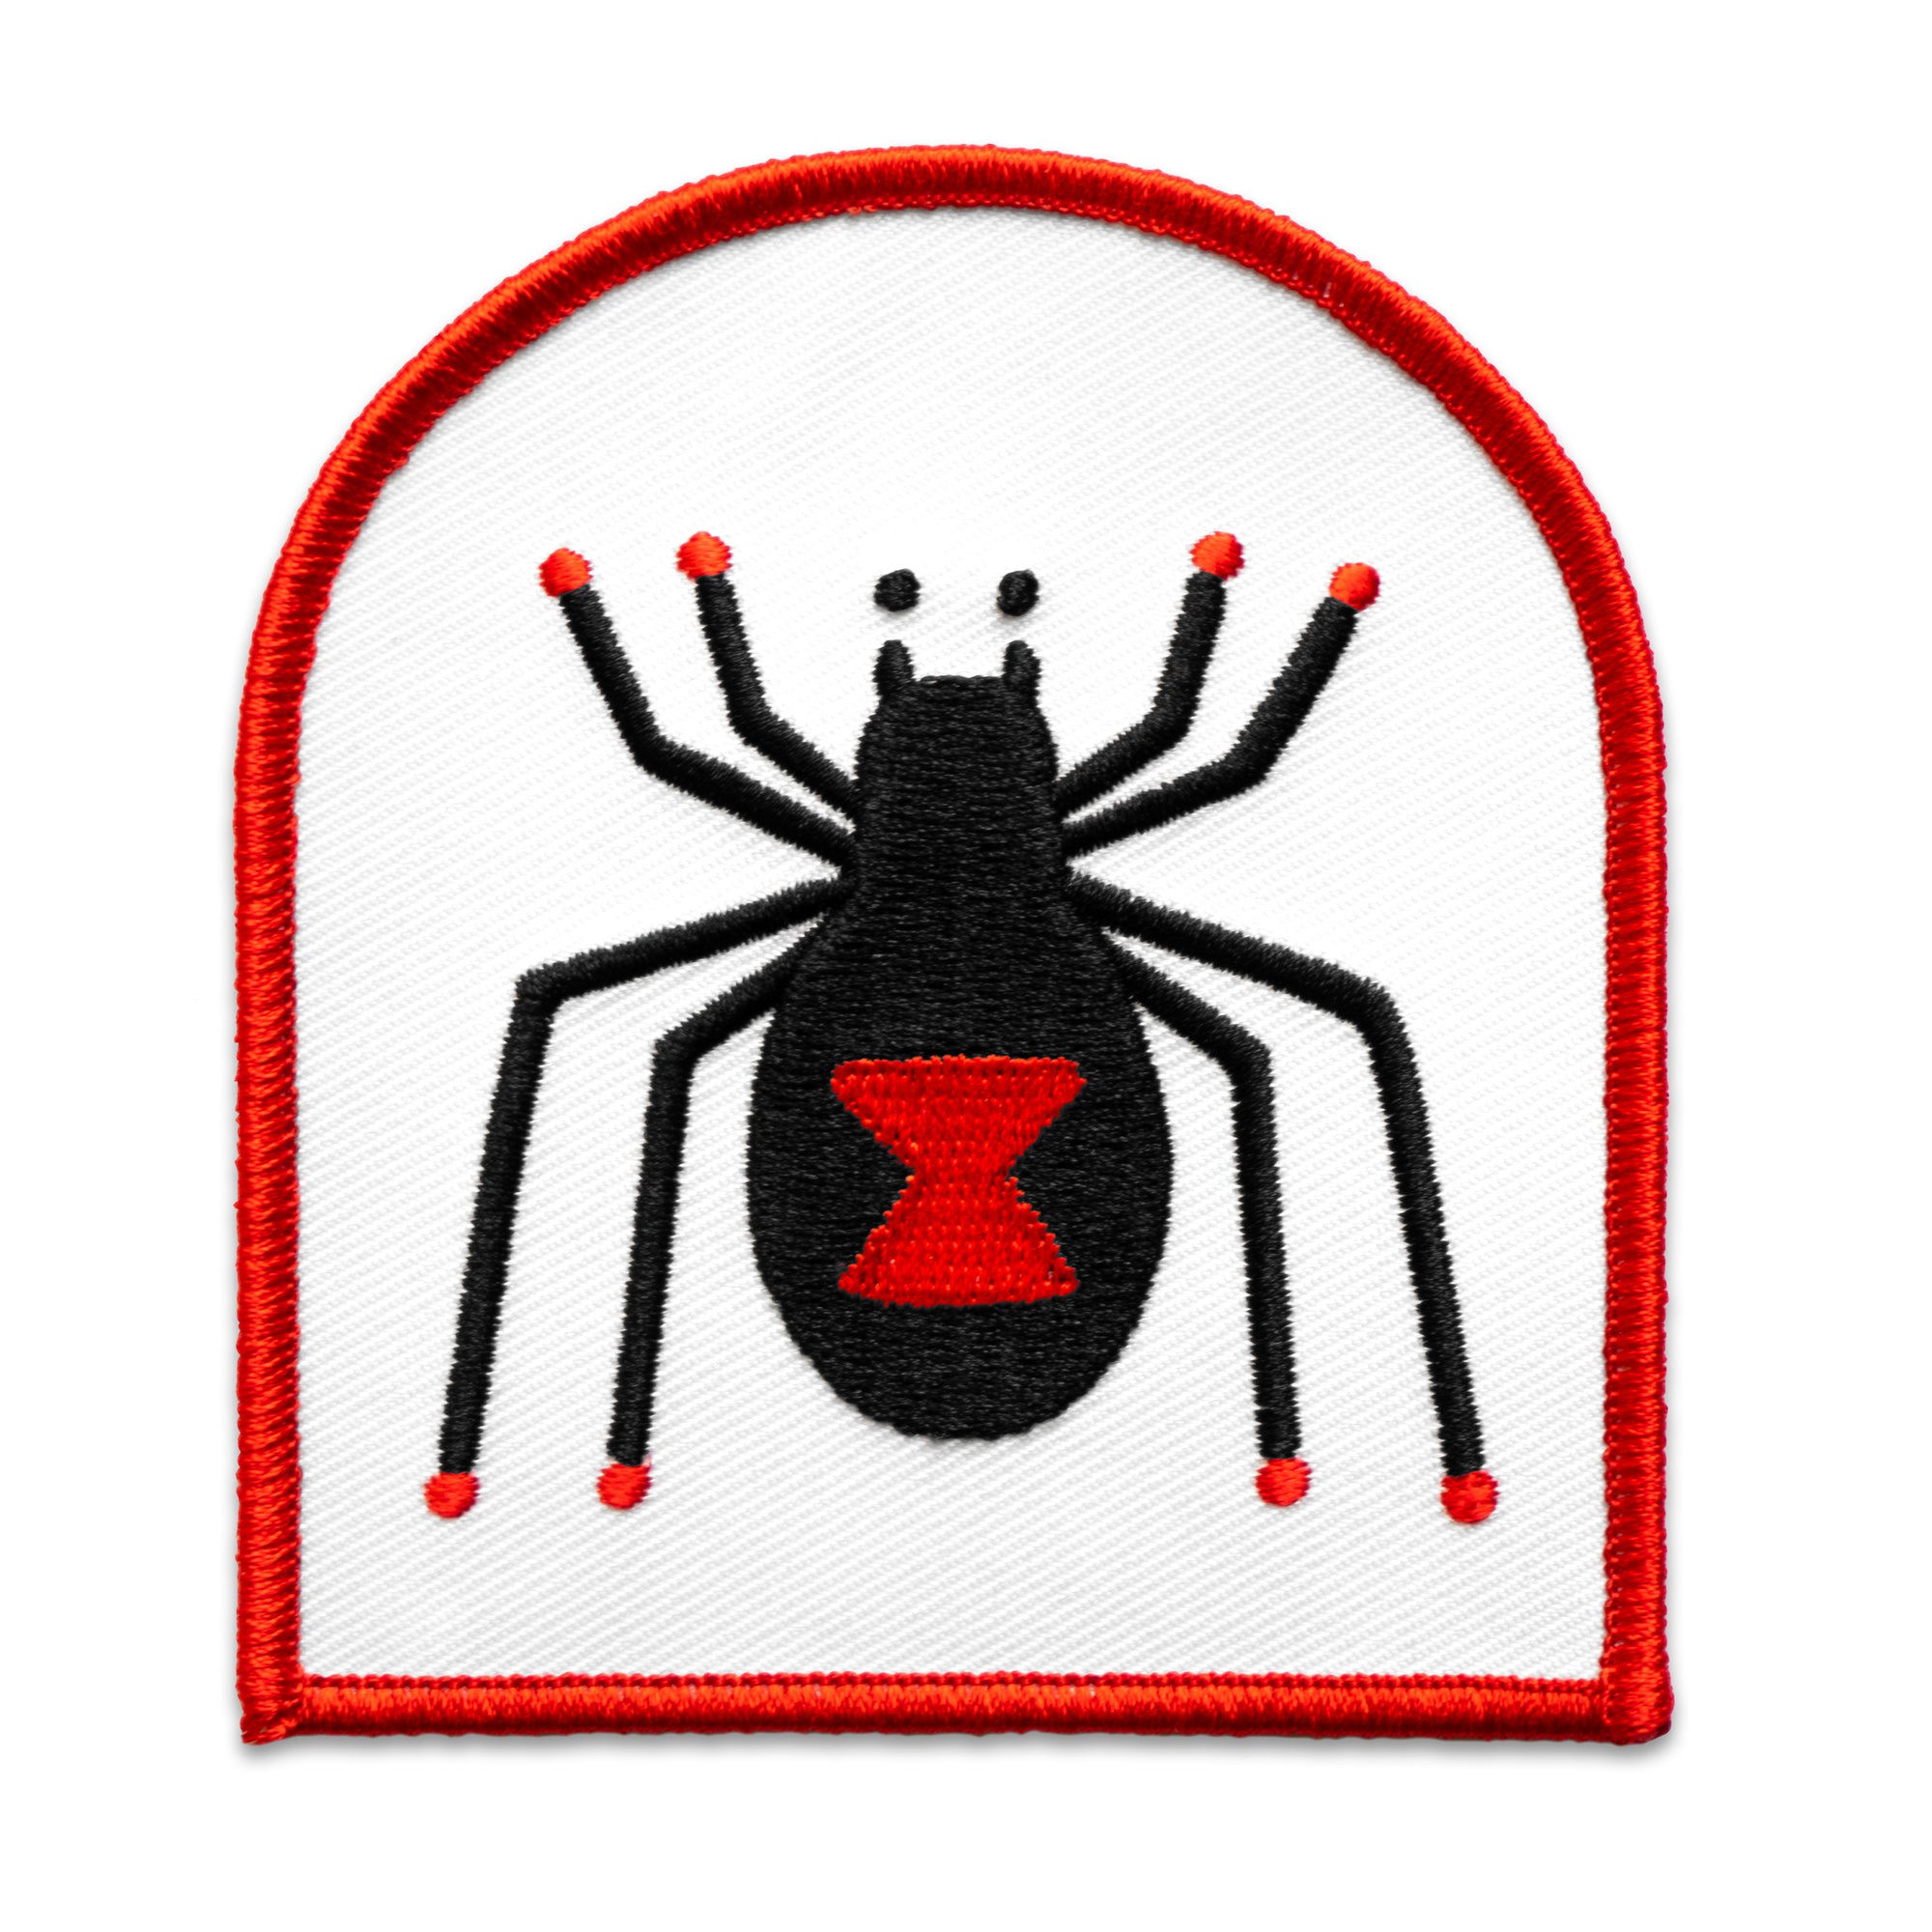 The "Black Widow" Patch by No Fun®.  Patch is white, with a read boarder in the shape of a tombstone. There is a cartoon Black Widow spider design in the center of the patch.  